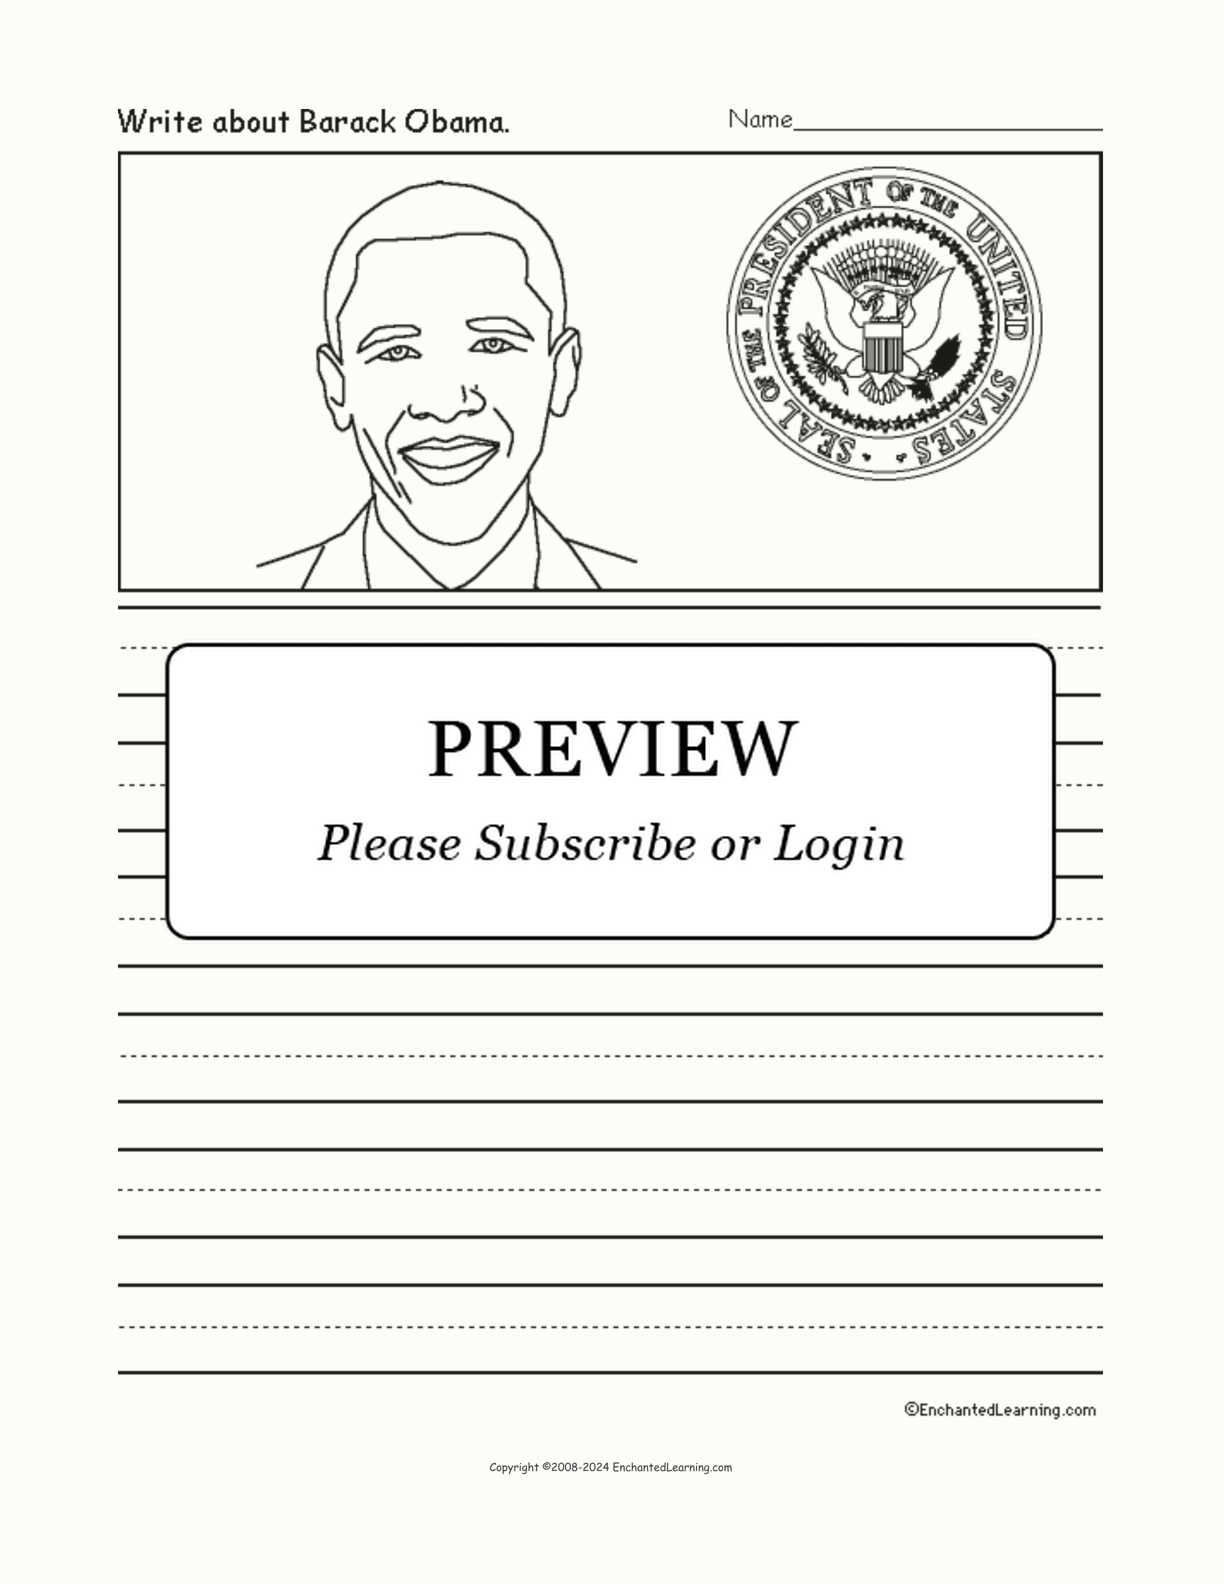 Picture Prompts - Barack Obama interactive worksheet page 1